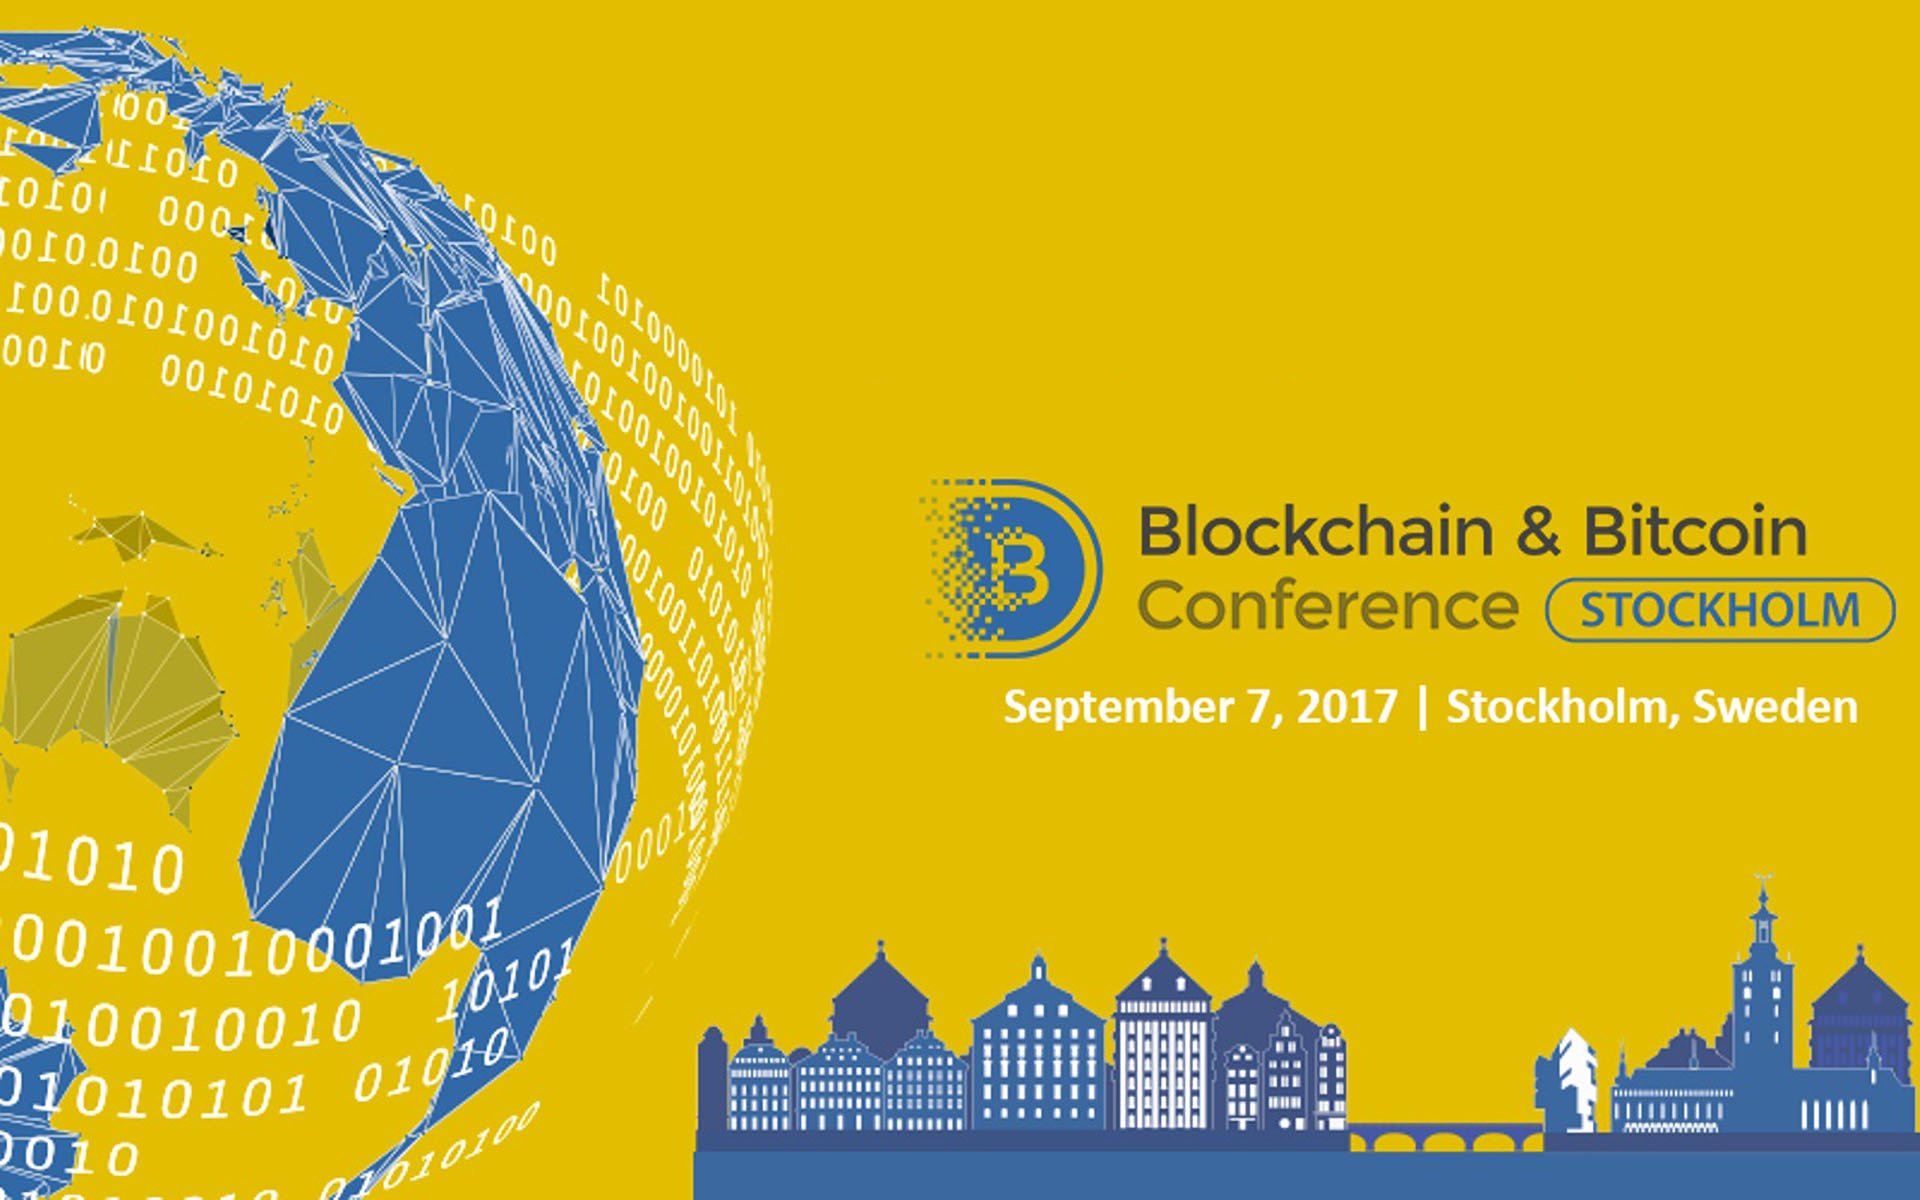 Blockchain & Bitcoin Conference Stockholm to Feature Discussions on ICOs and Blockchain Development